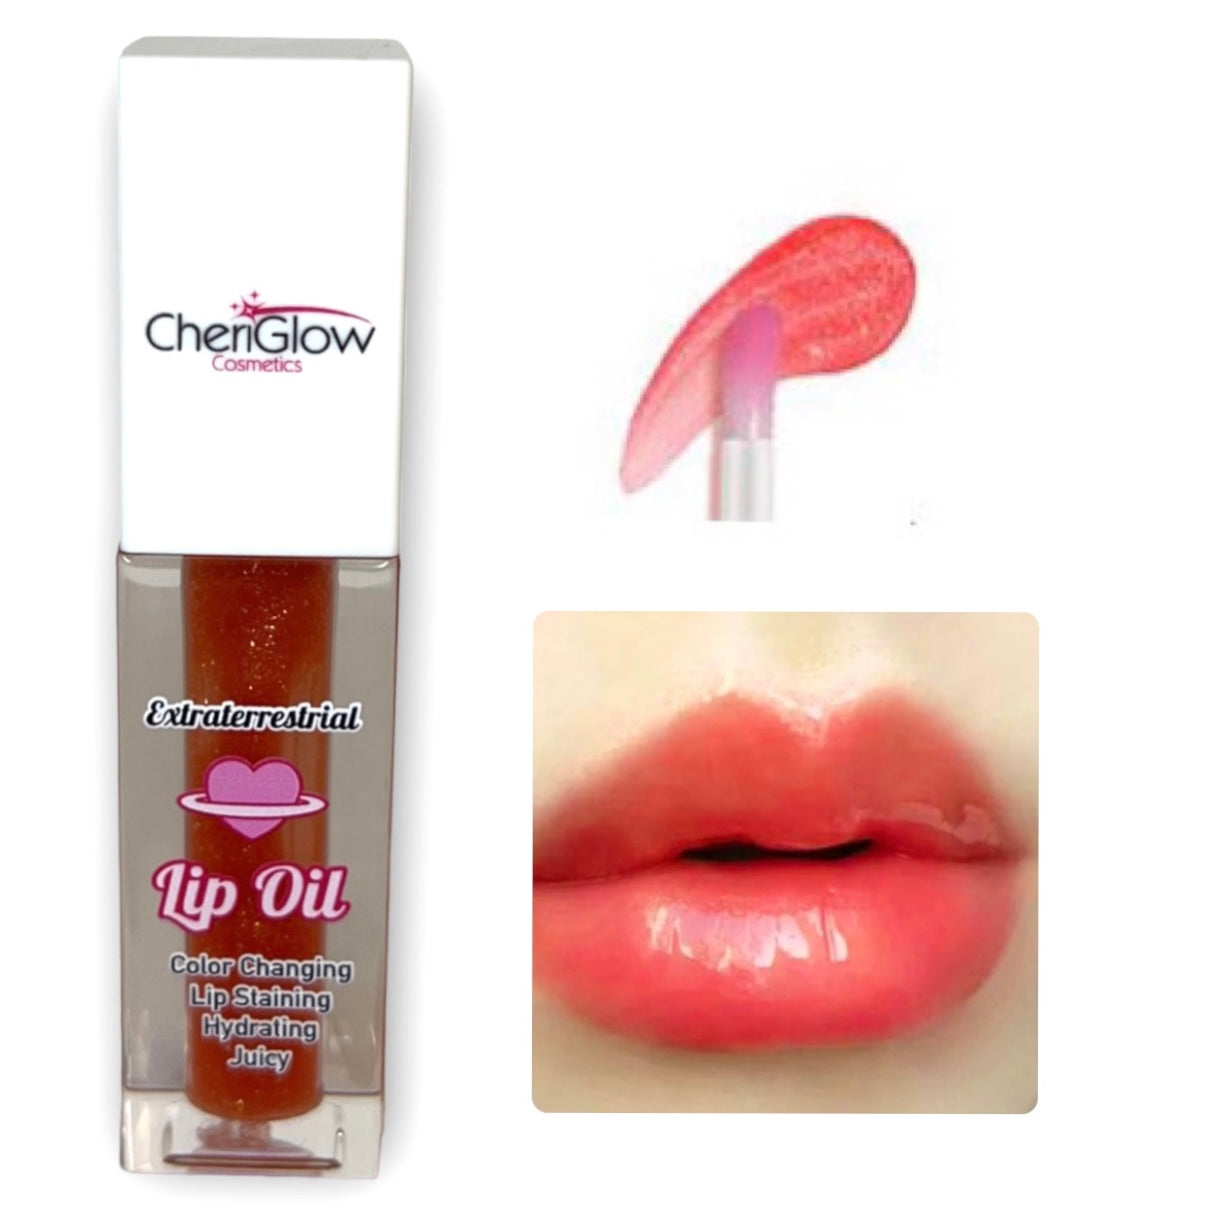 Extraterrestrial Lip Oil - Color Changing - Lip Staining - Mars